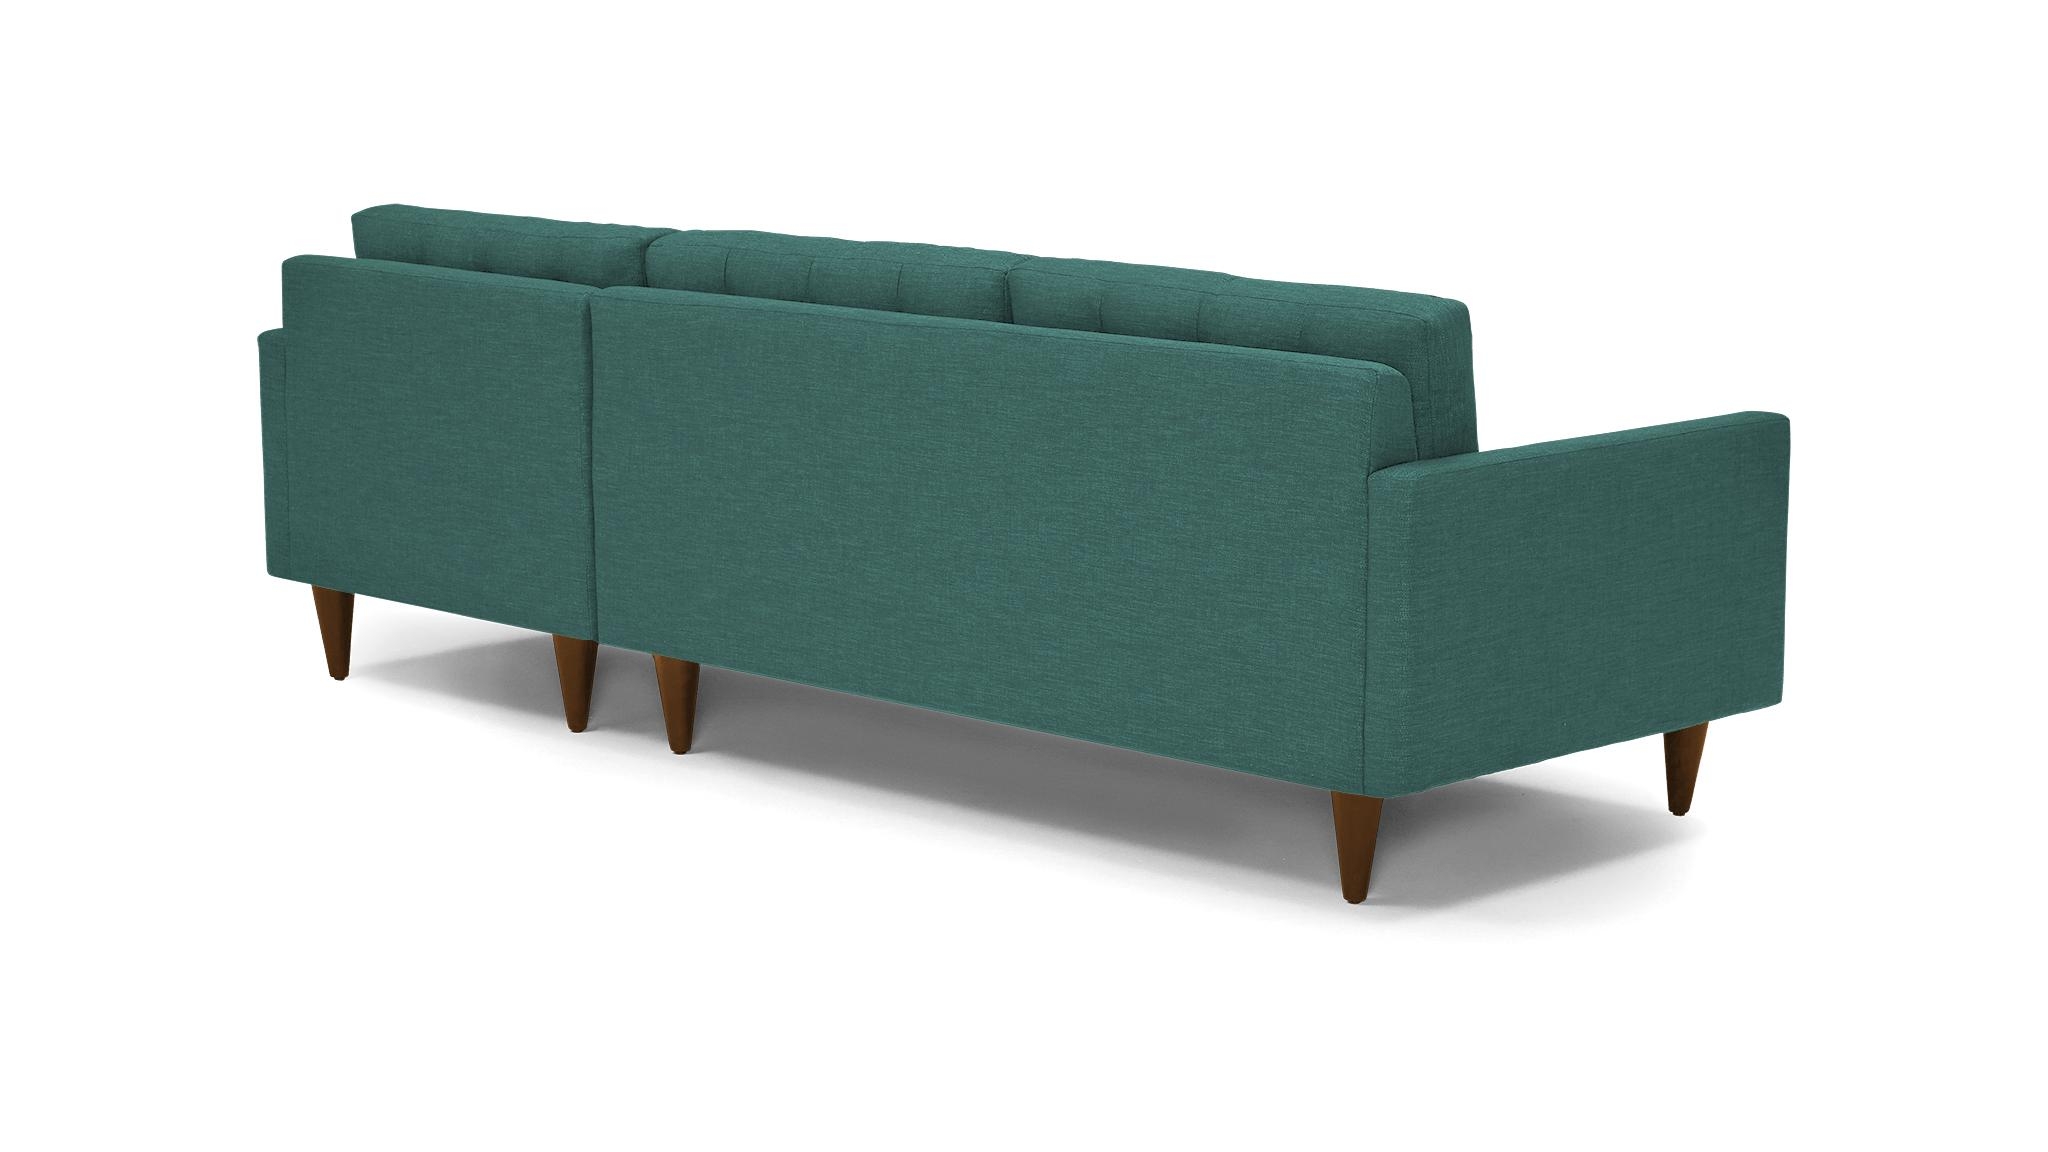 Blue Eliot Mid Century Modern Sectional - Prime Peacock - Mocha - Right - Image 3